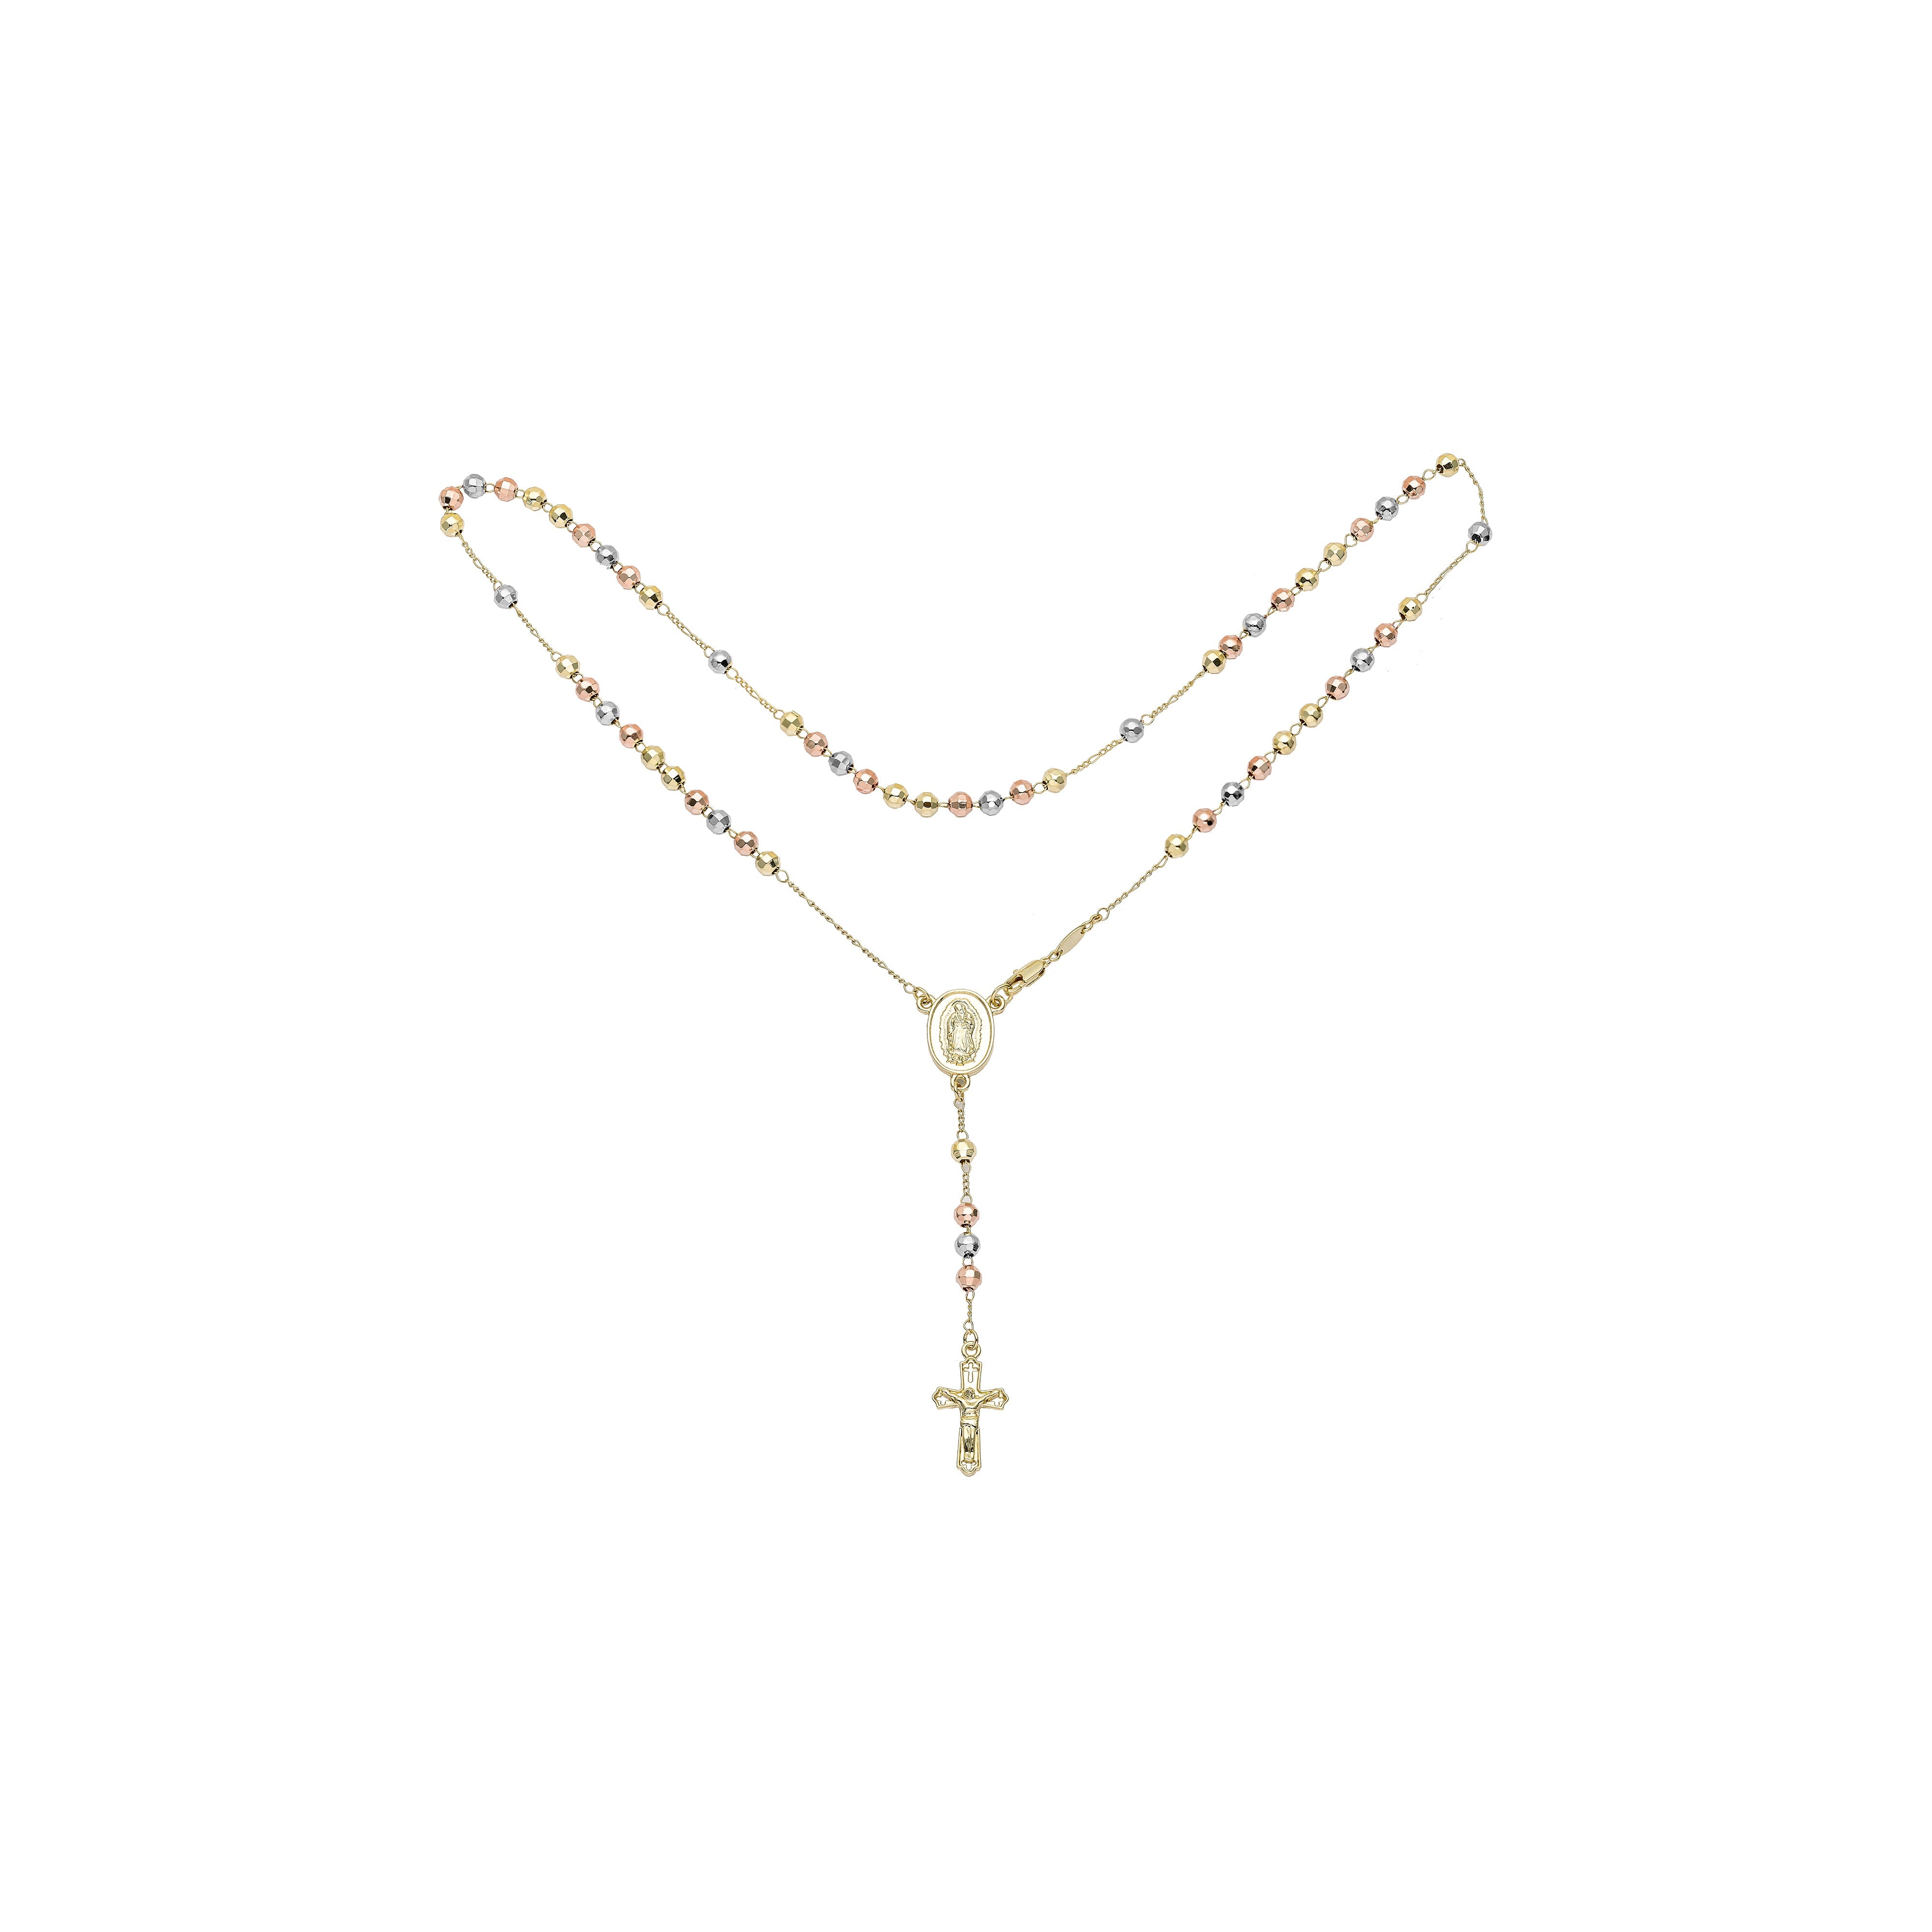 Italian Virgin of Guadalupe Catholic beads Rosary Necklace plated in White Gold, 14K Gold, 14K Gold two tone